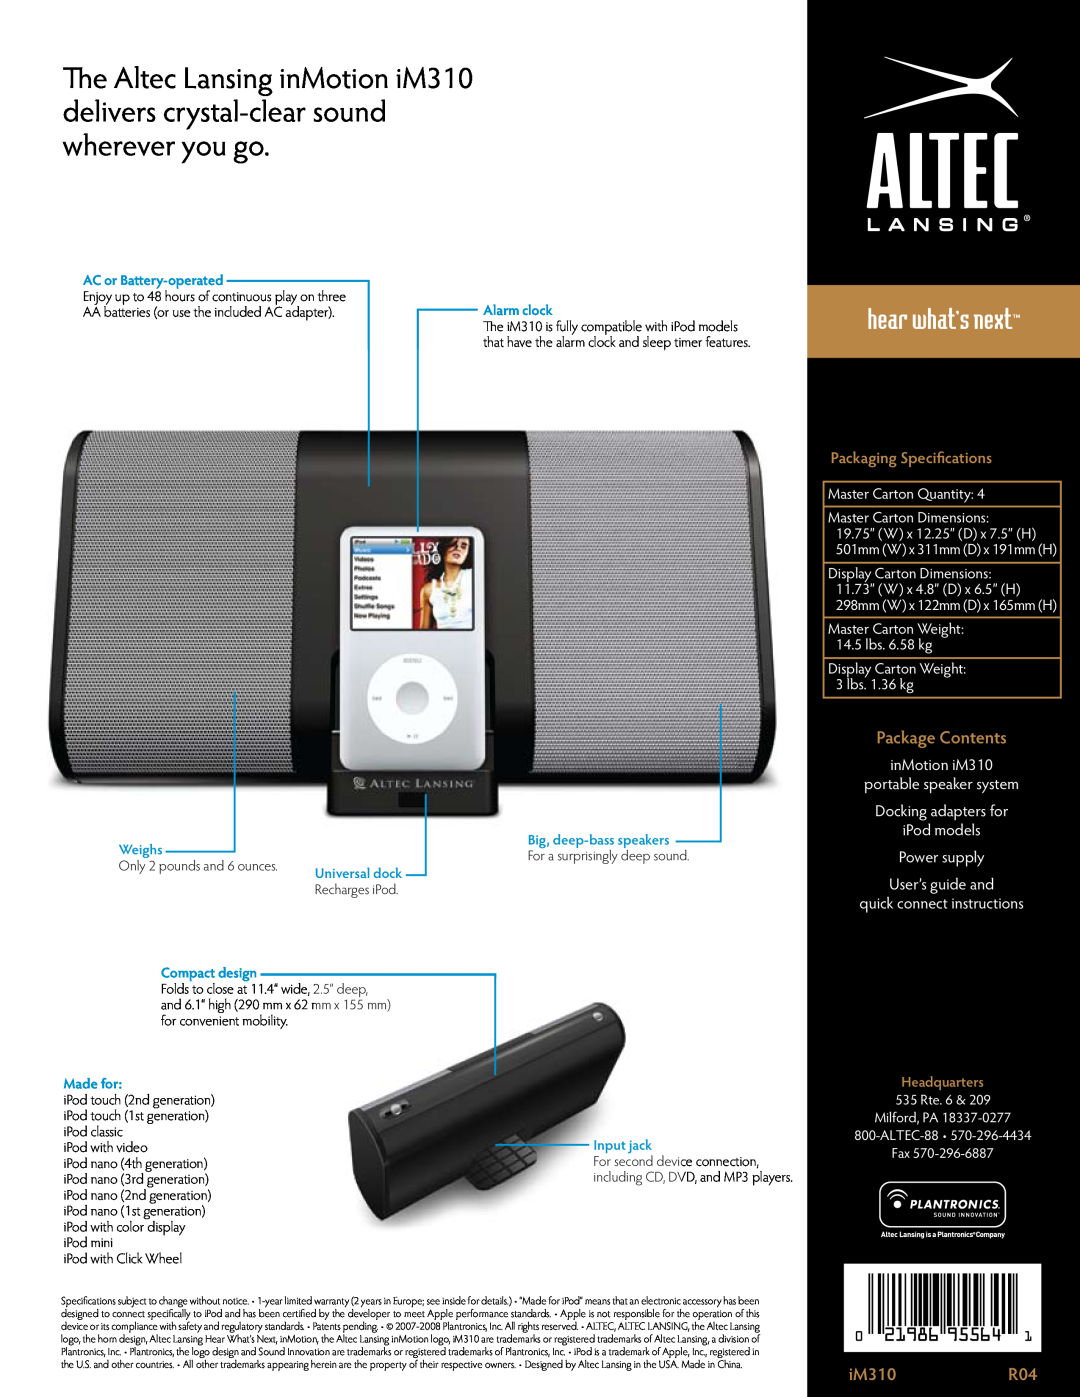 Altec Lansing Package Contents, iM310R04, Packaging Specifications, inMotion iM310 portable speaker system, Made for 